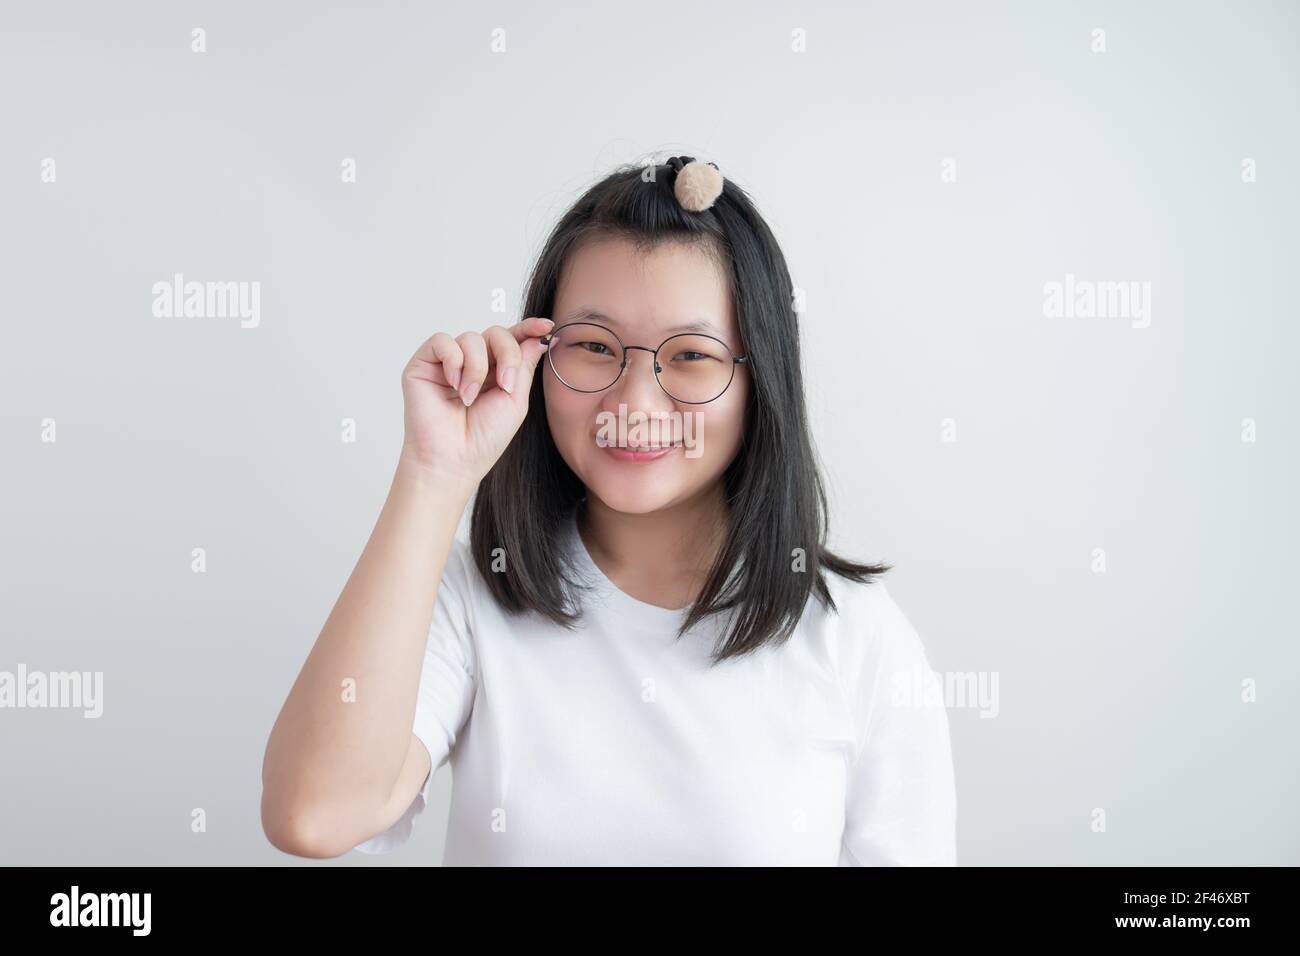 Young Asian Glasses Girl Touches Her Glasses And Smiles To Camera On